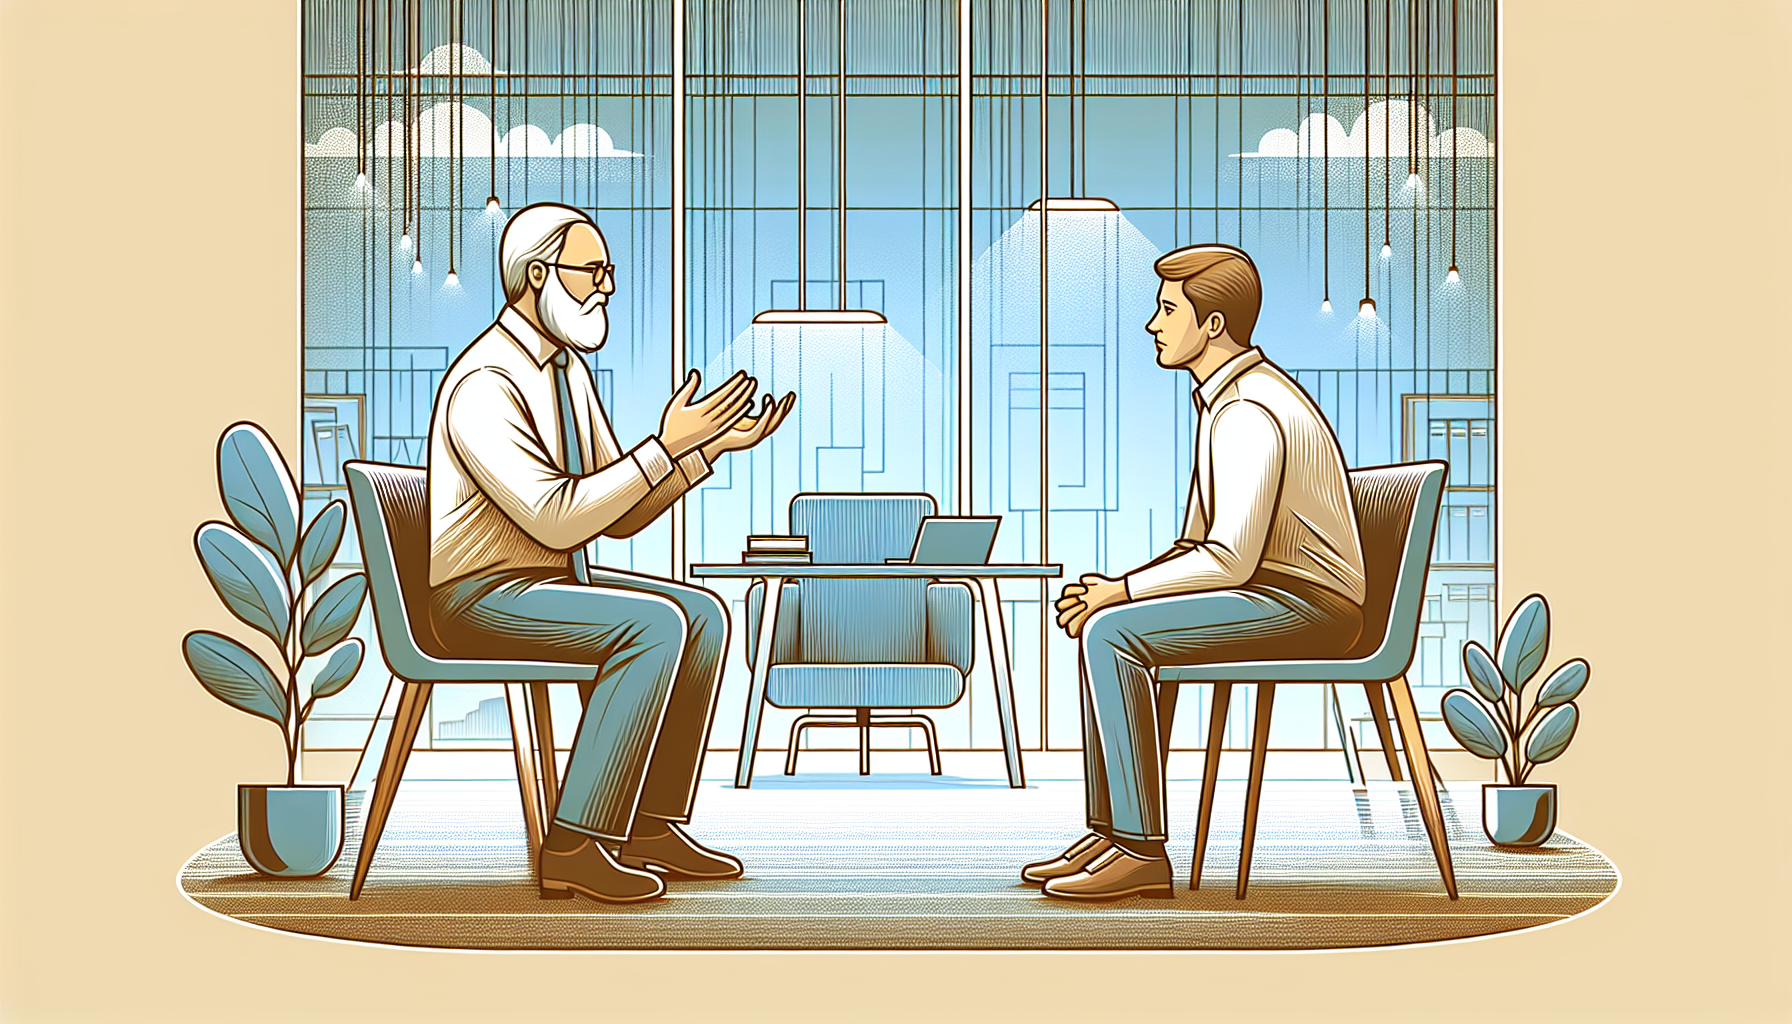 Illustration of a workplace coach providing guidance to an employee